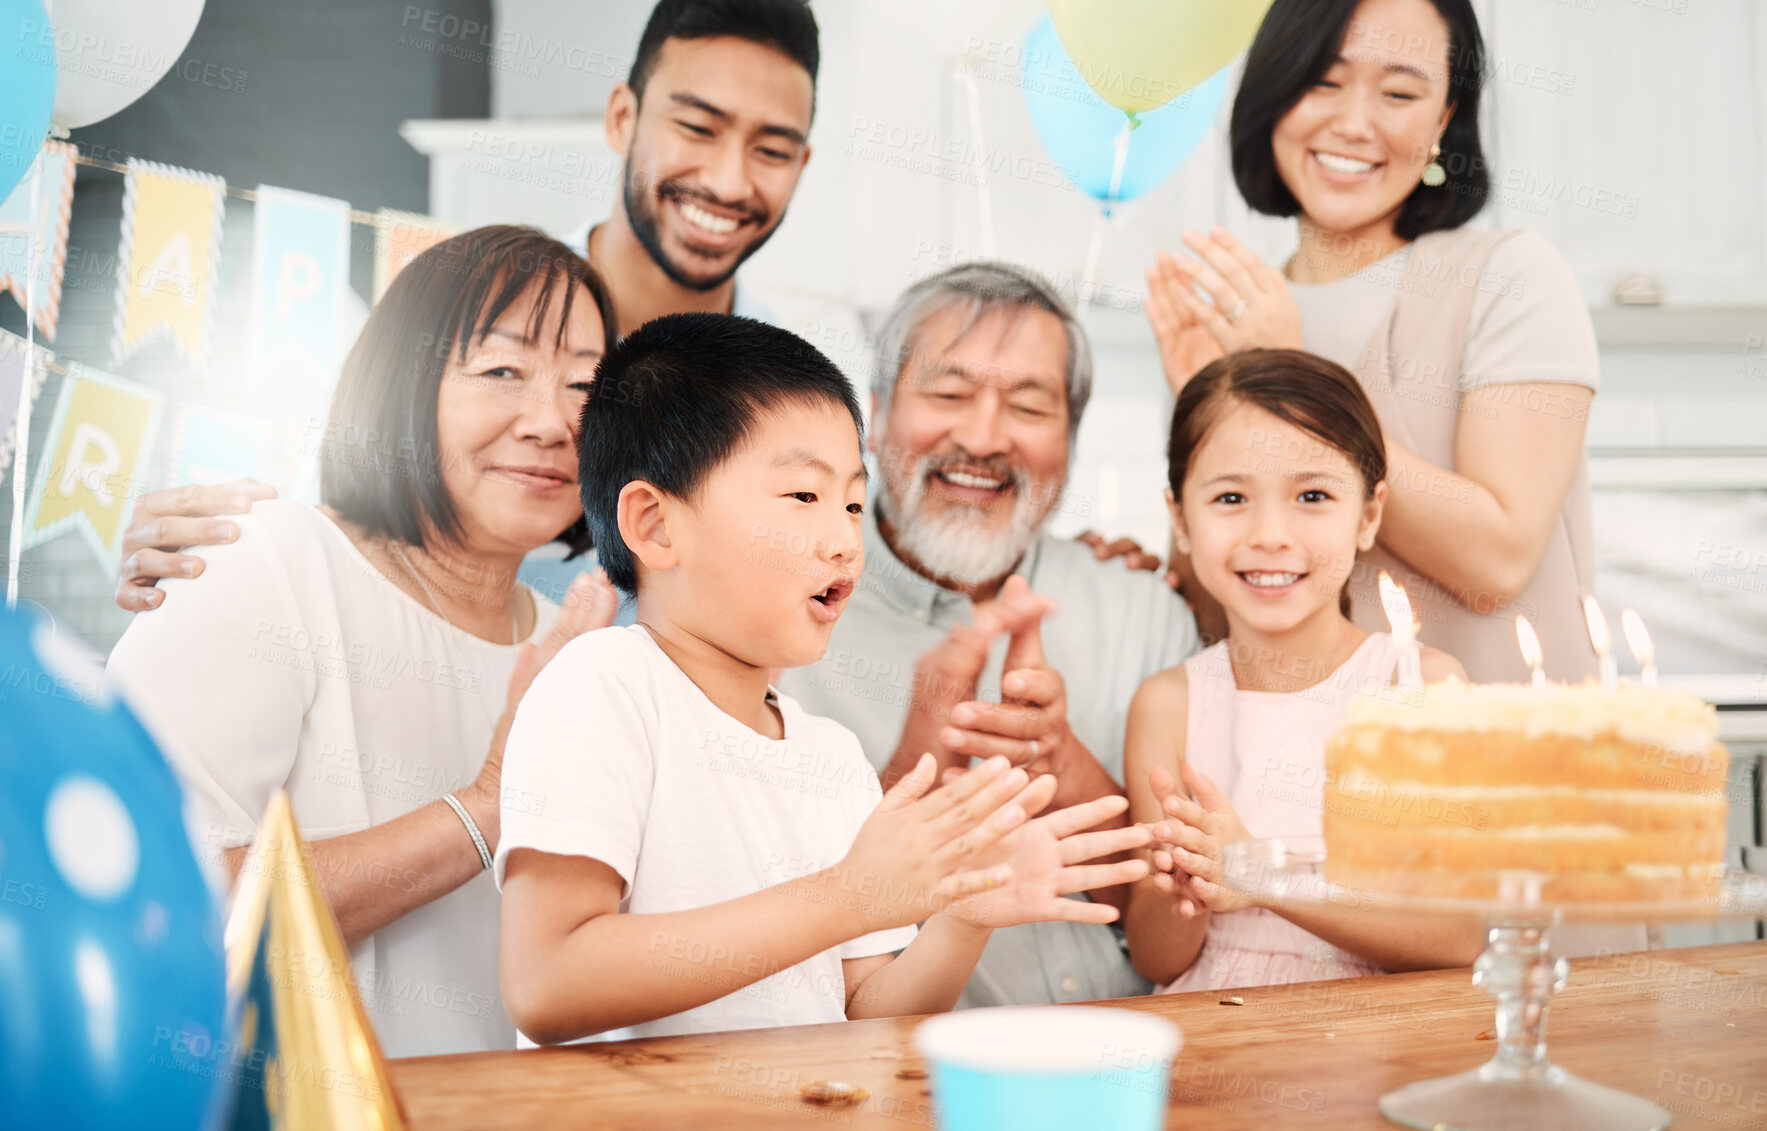 Buy stock photo Shot of an adorable little boy celebrating a birthday with his family at home